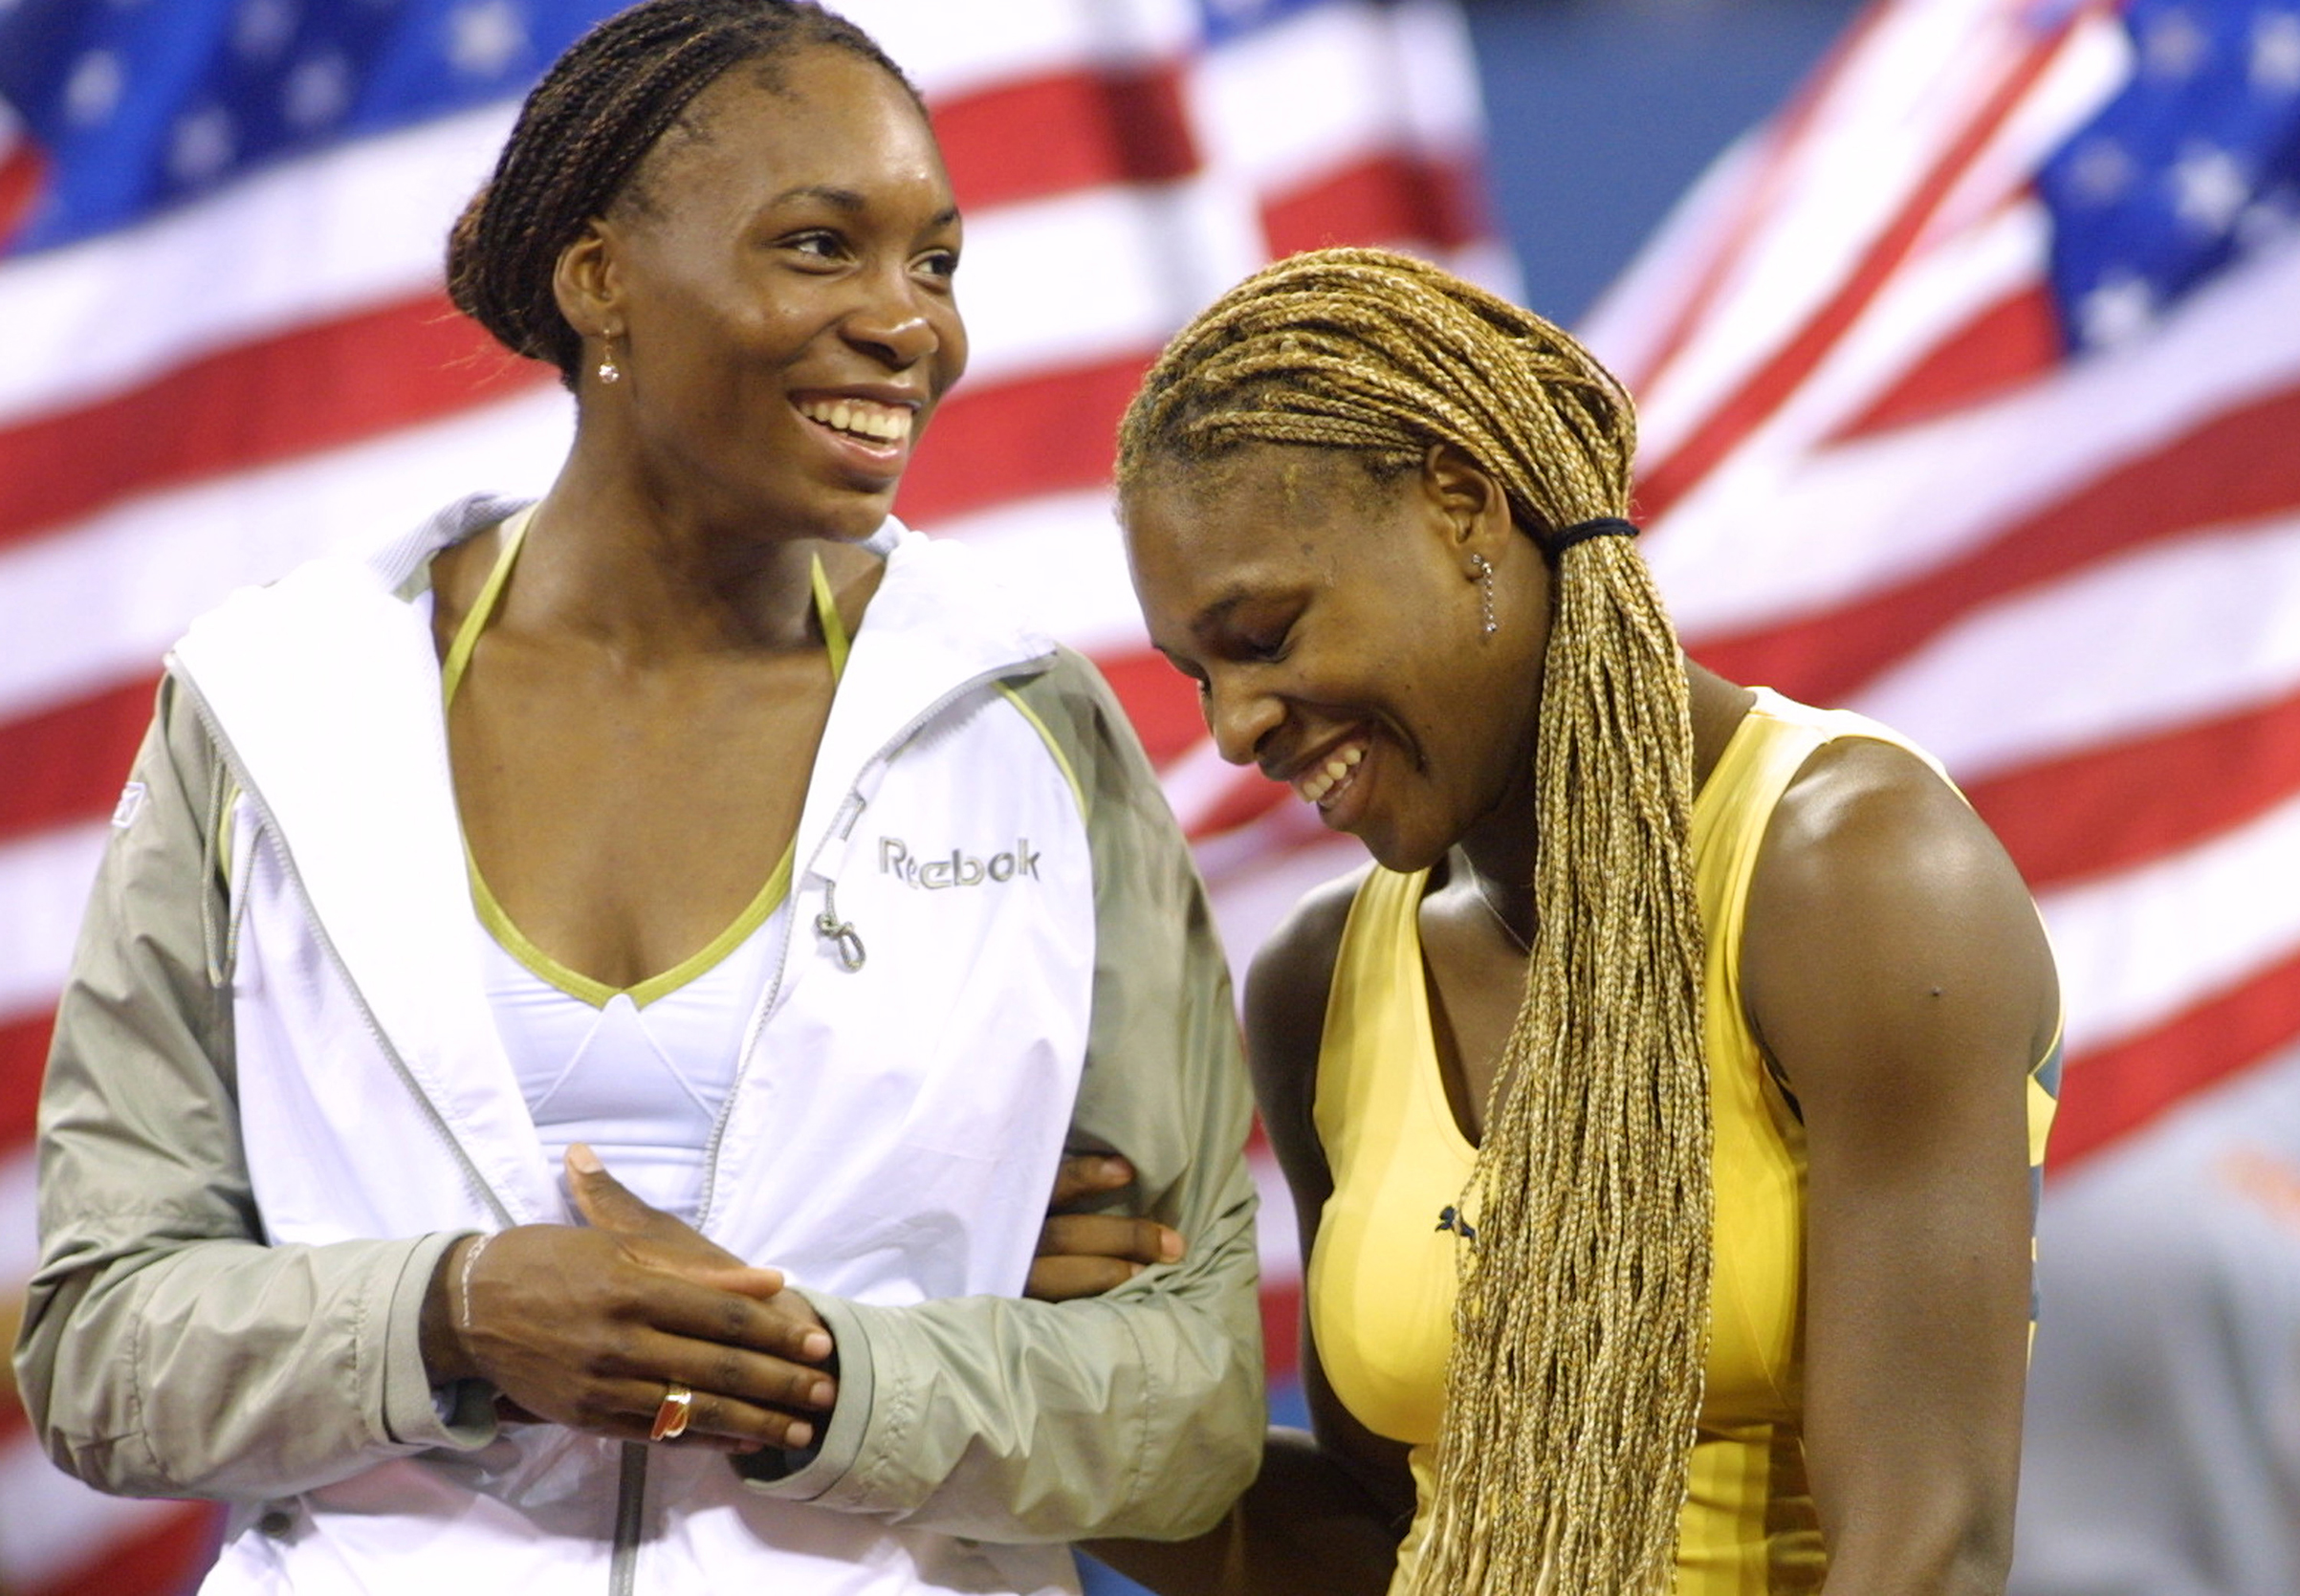 Venus Williams and Serena Williams share a laugh. Venus defeats her sister Serena, 6-2, 6-4 to win U.S. Open. (Cynthia Lum—Getty Images)